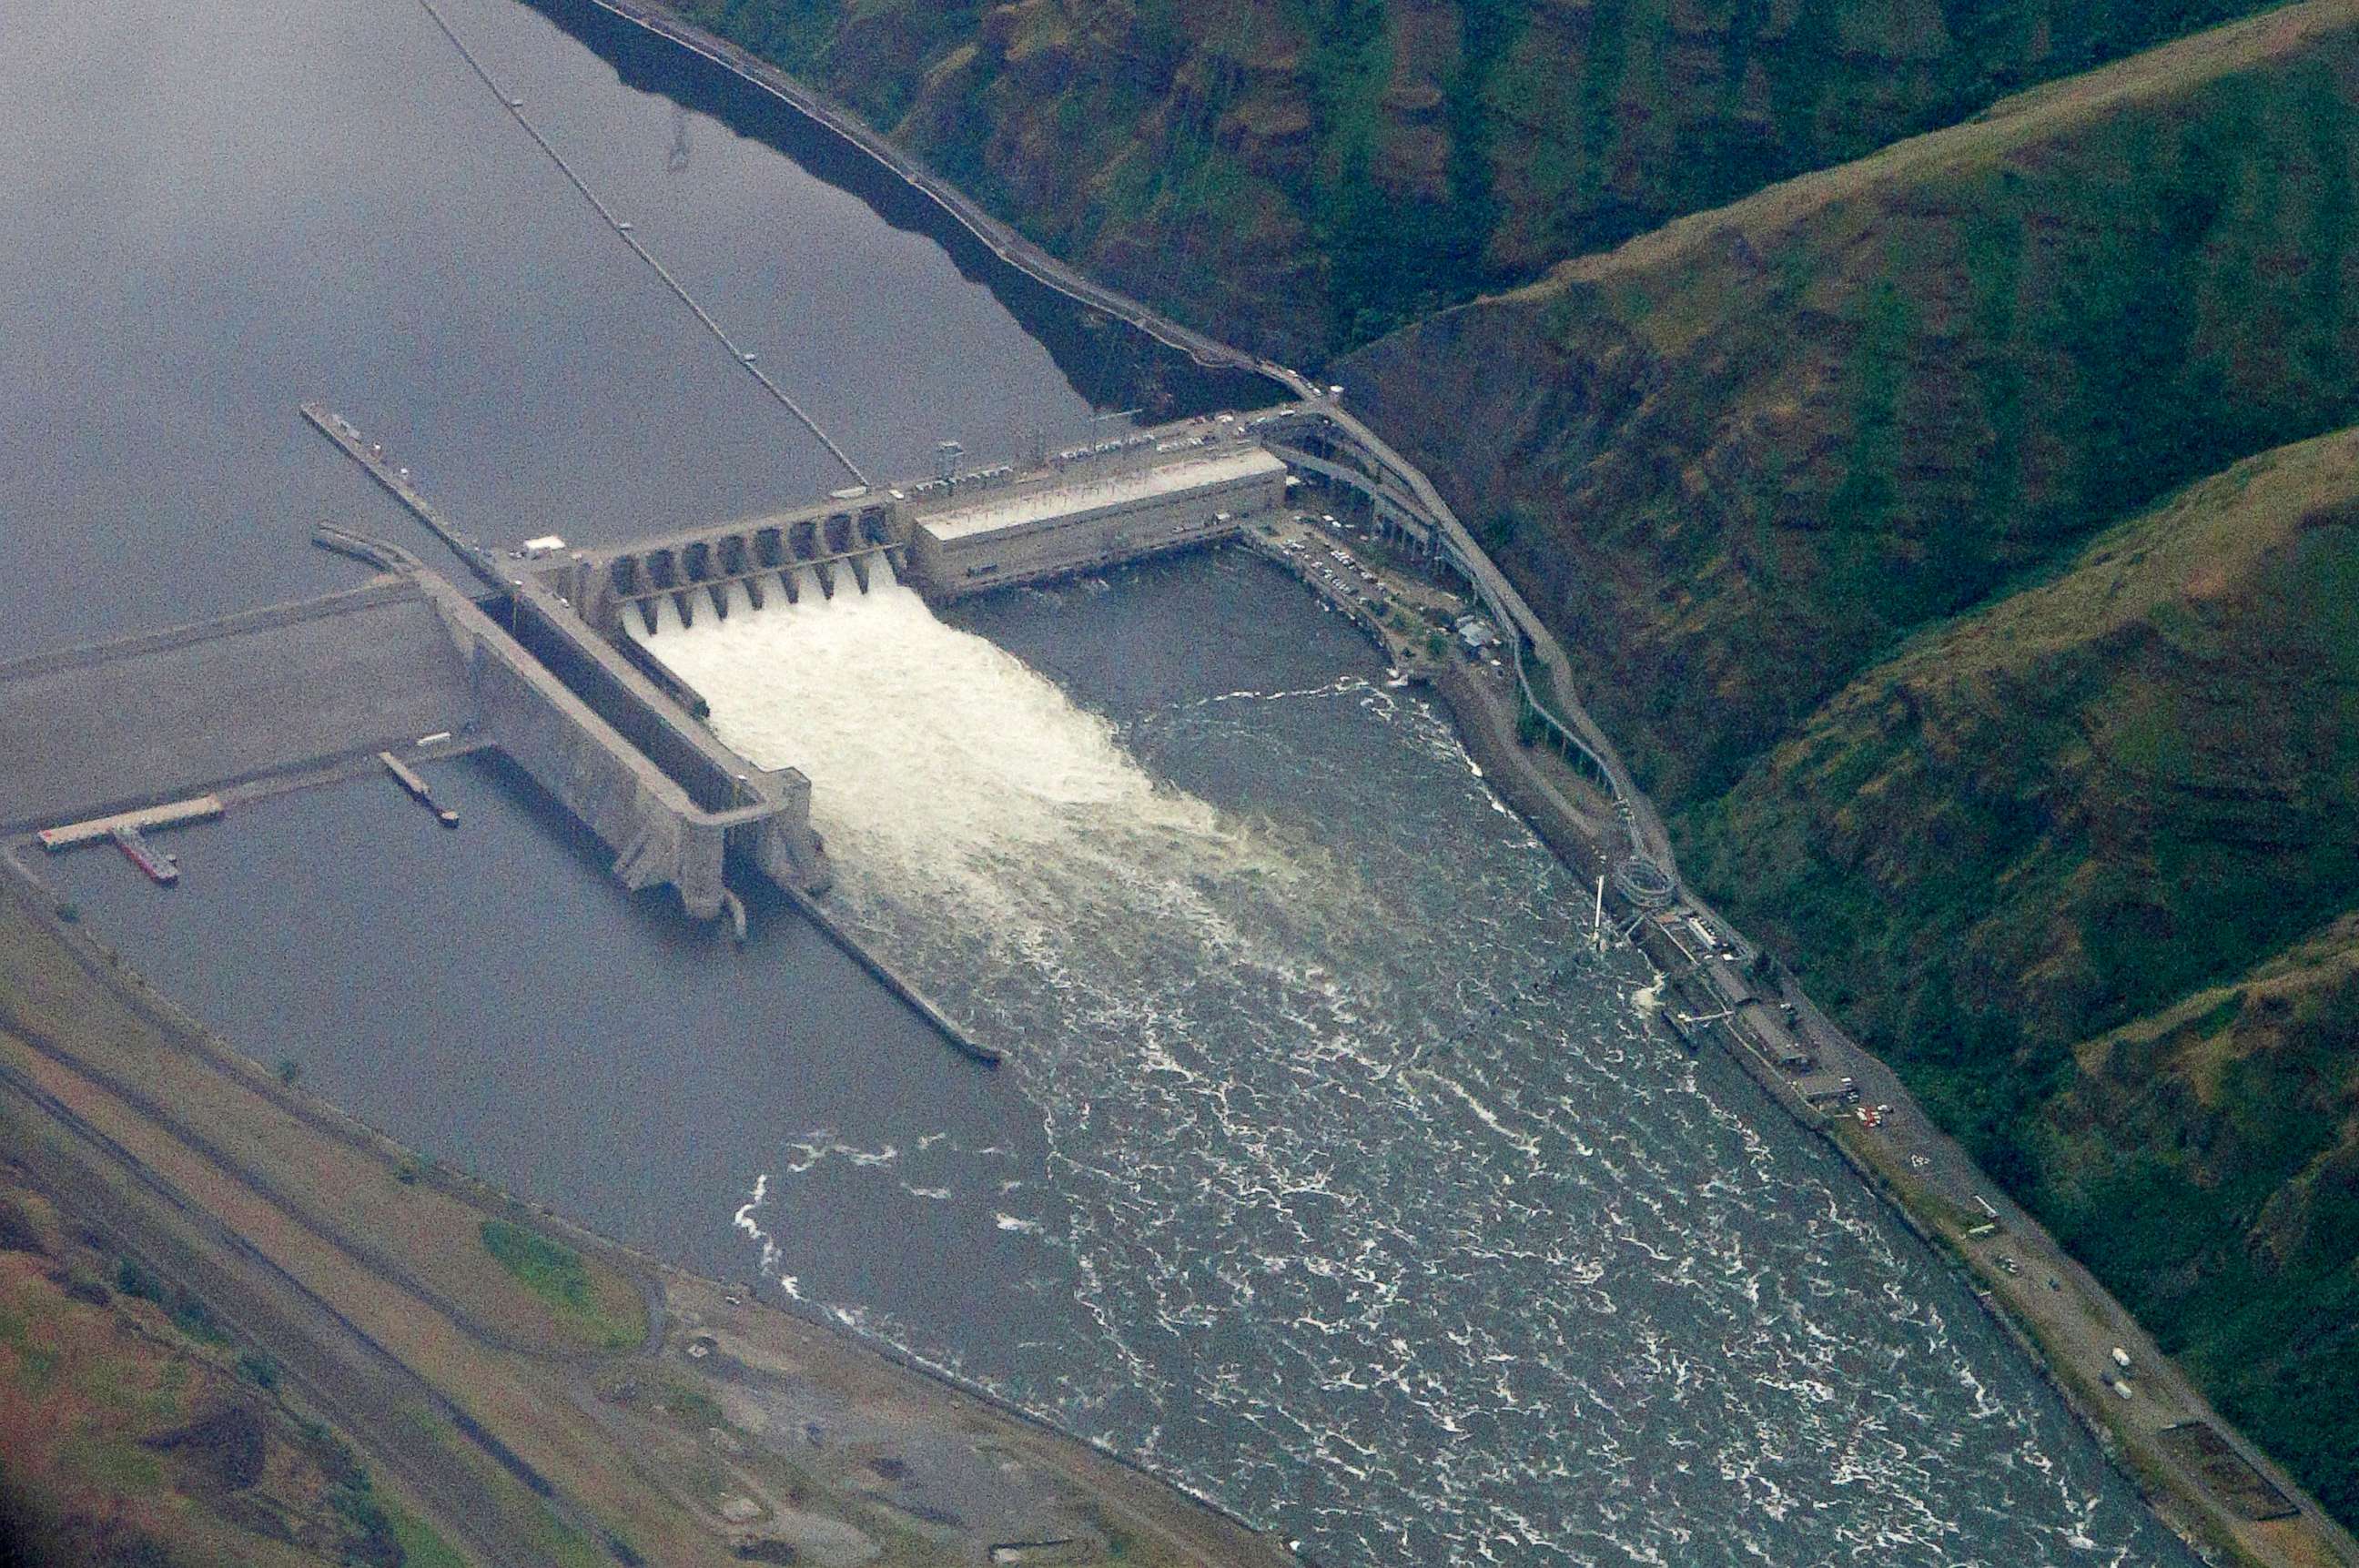 PHOTO: FILE -The Lower Granite Dam spills into the Snake River in Whitman County, WA in this May 2019 photo. Congressman Simpson (R-ID) is proposing to breach this and 3 other dams to help fish migration